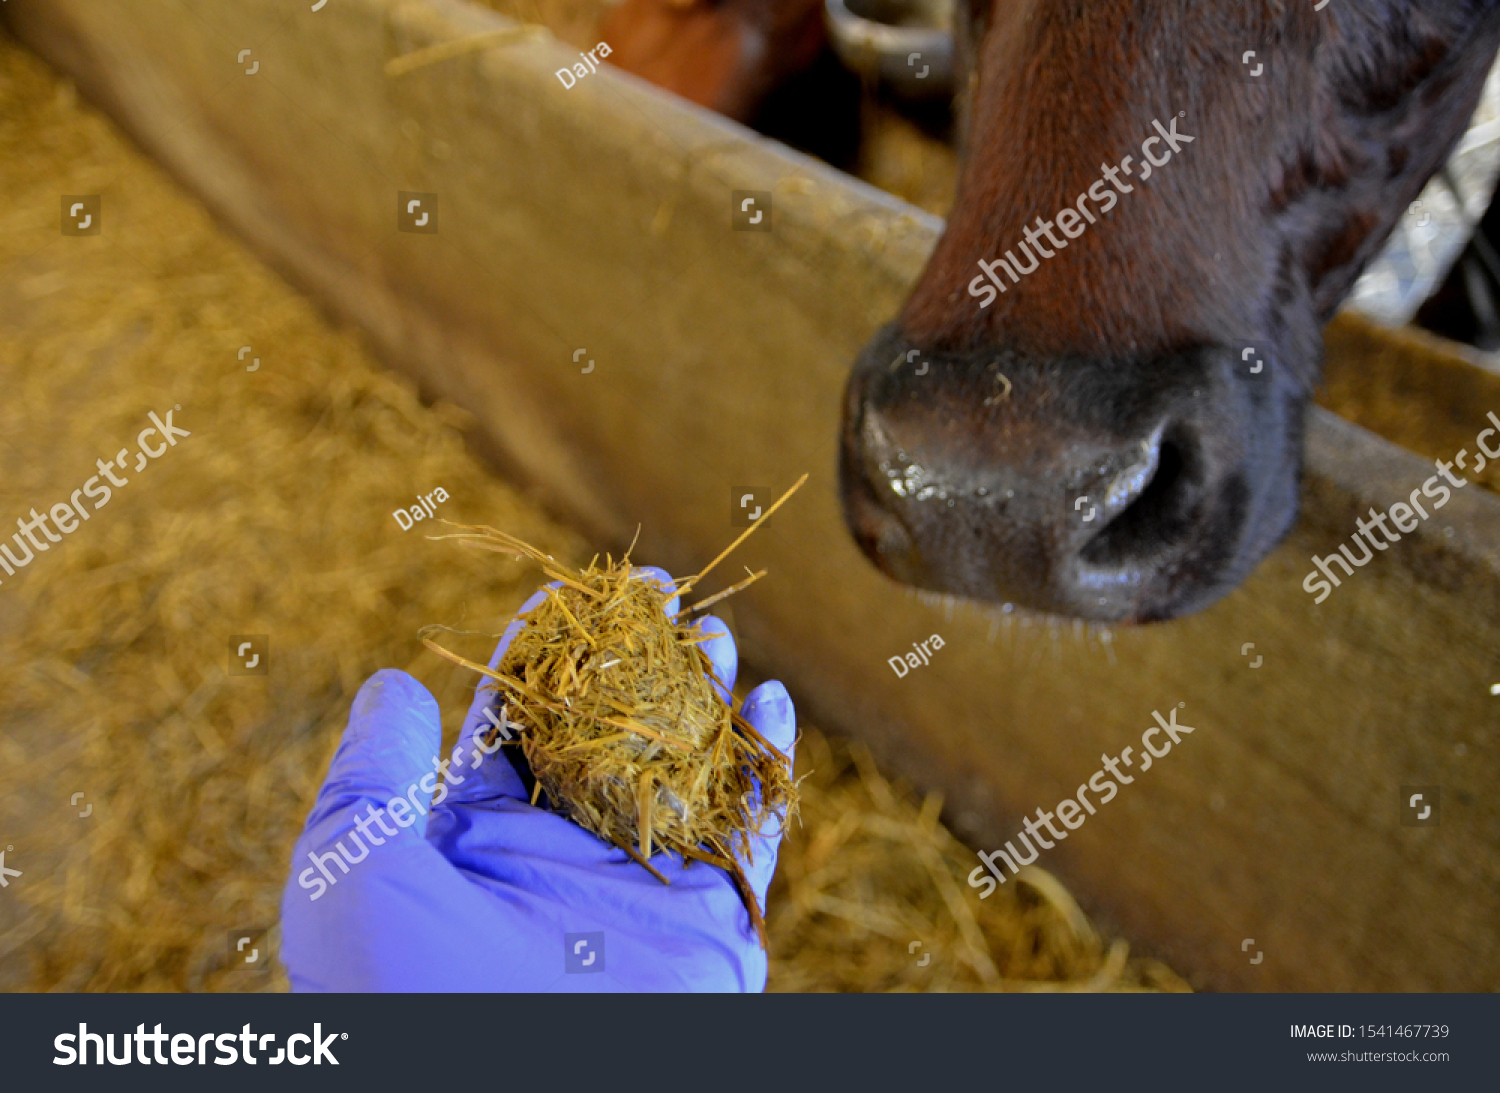 Cow´s cud on hand. It is partly digested food returned from the first stomach of ruminants to the mouth for furter chewing #1541467739